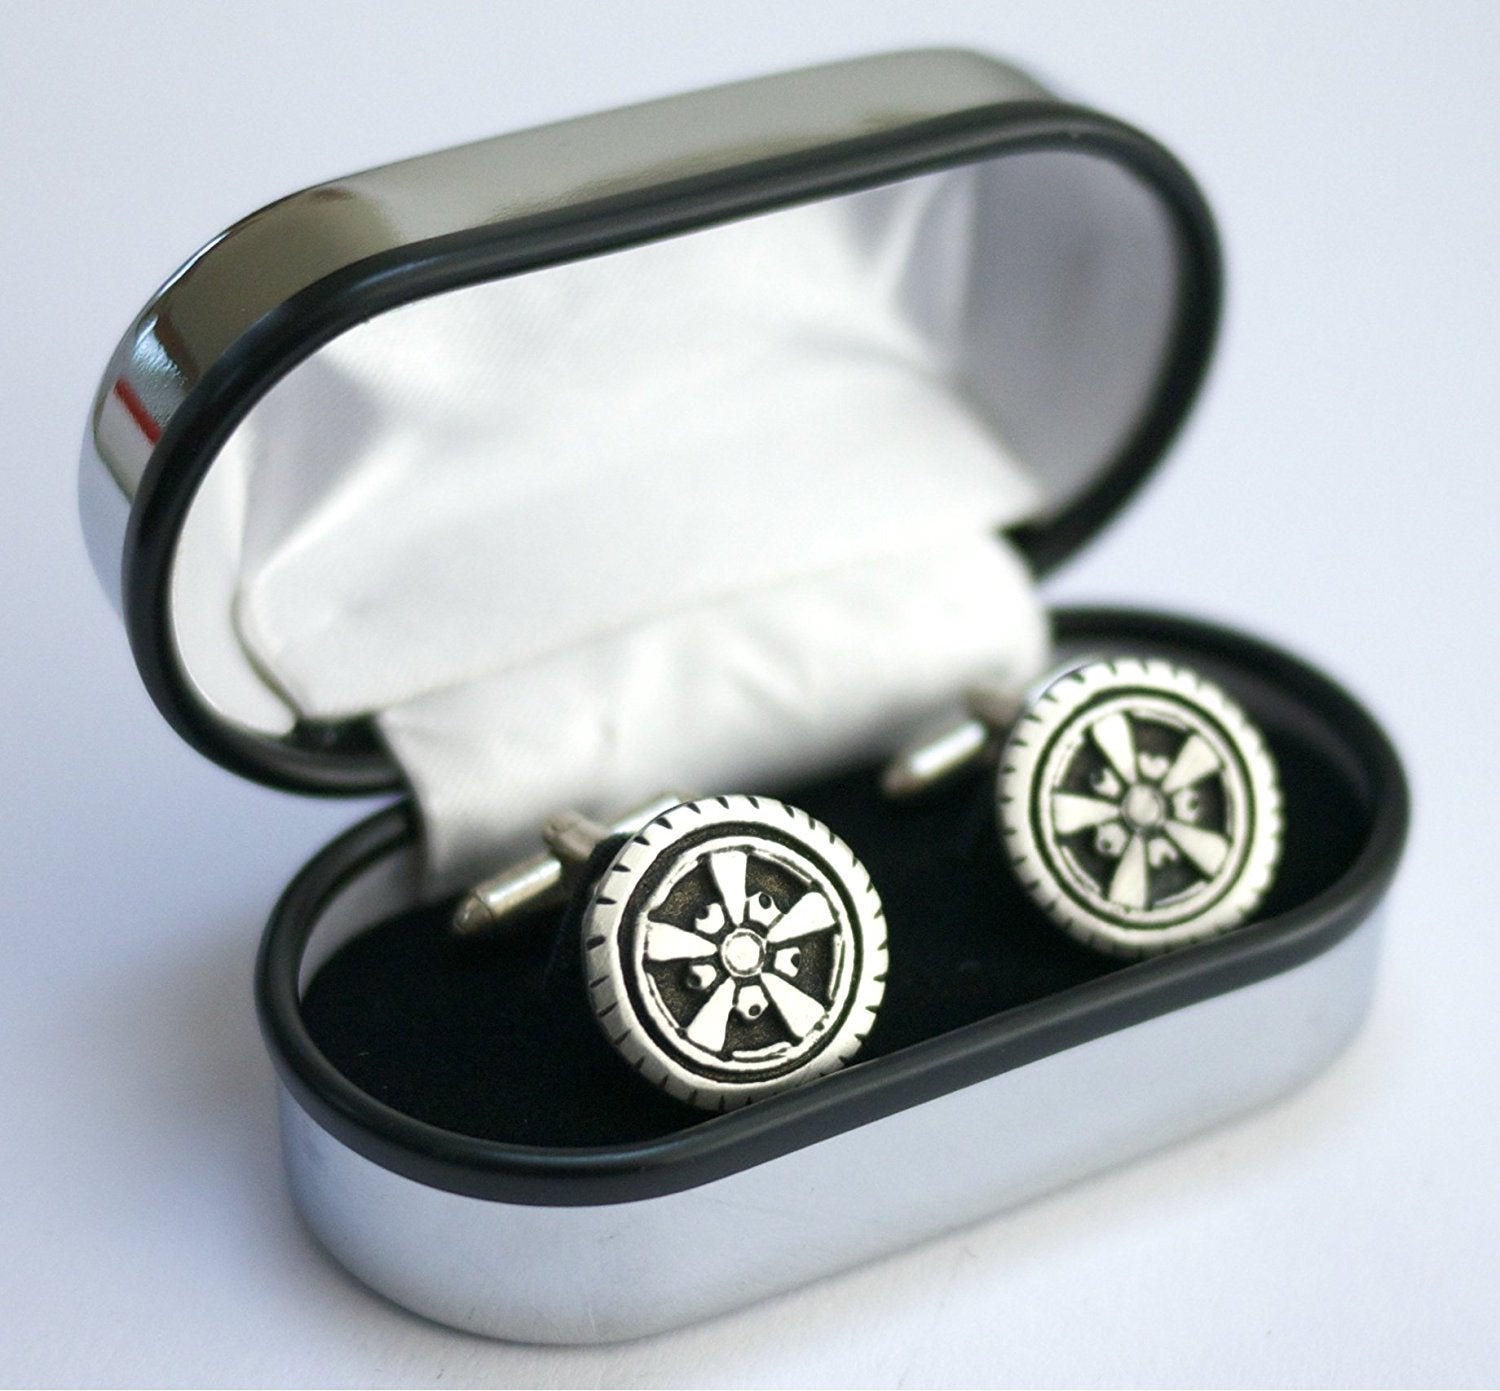 Alloy wheel cuff links , the perfect gift for a man